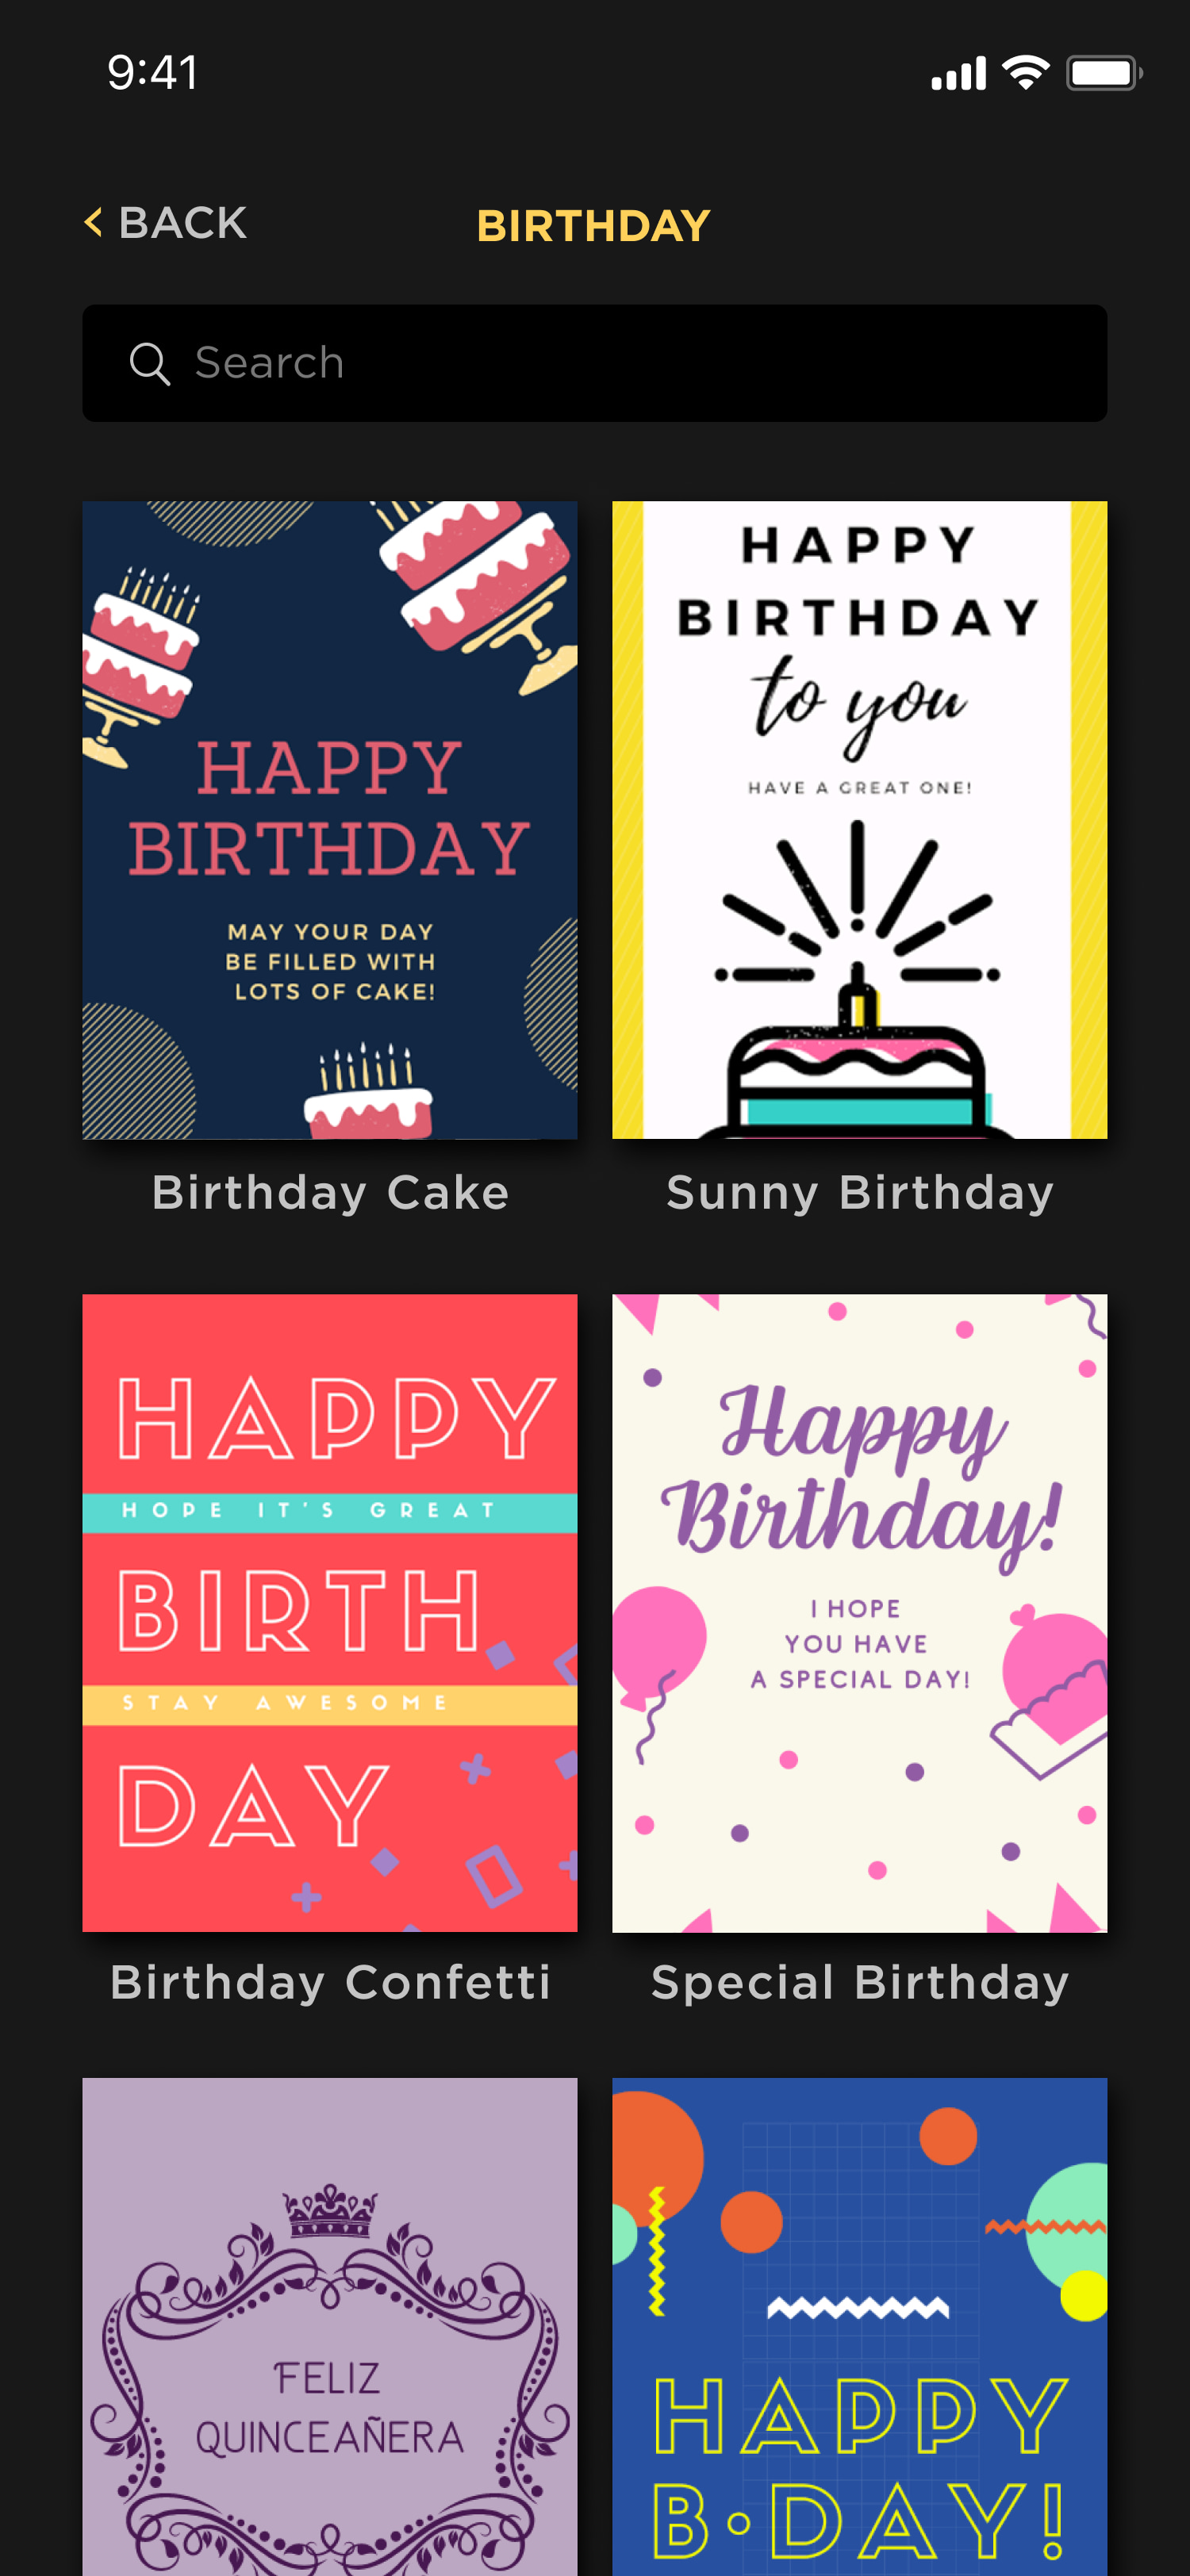 CircleIt allows users to create and send digital greeting cards to any future date or for any future milestone